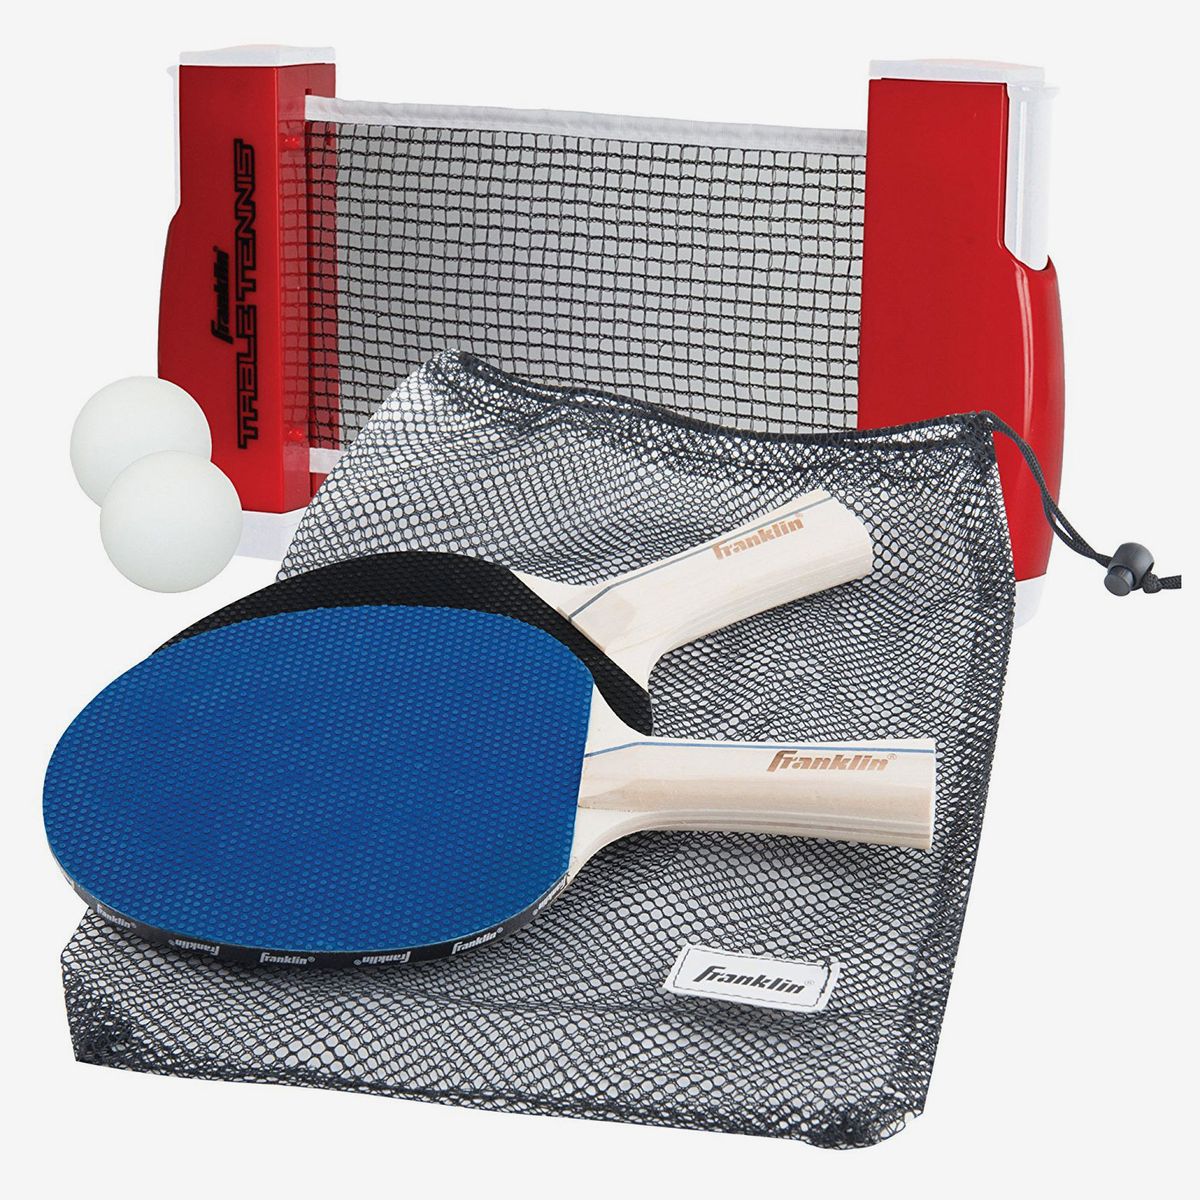 Extendable Net Fits Most Tables Table Tennis Set Christmas Gift Idea New 